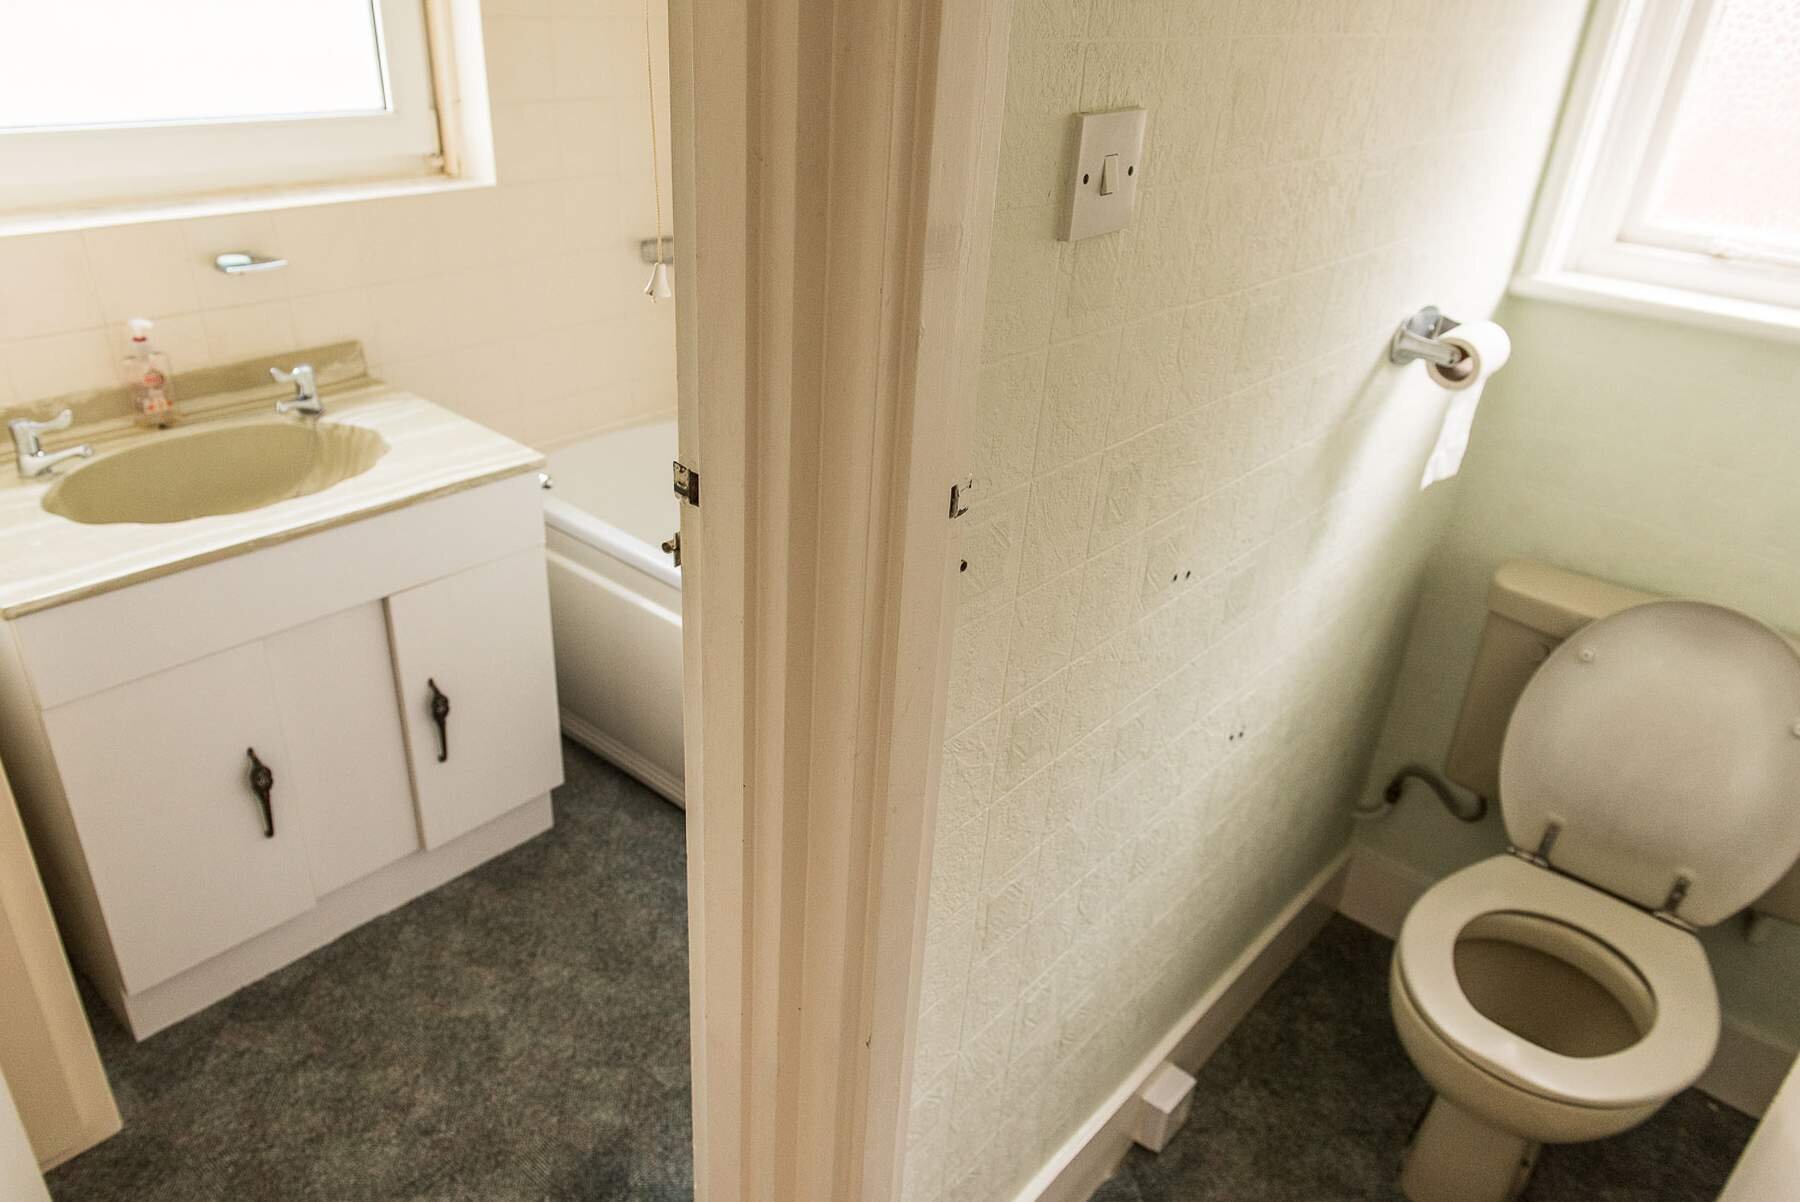 Before bathroom layout: the bathroom split by a dividing wall